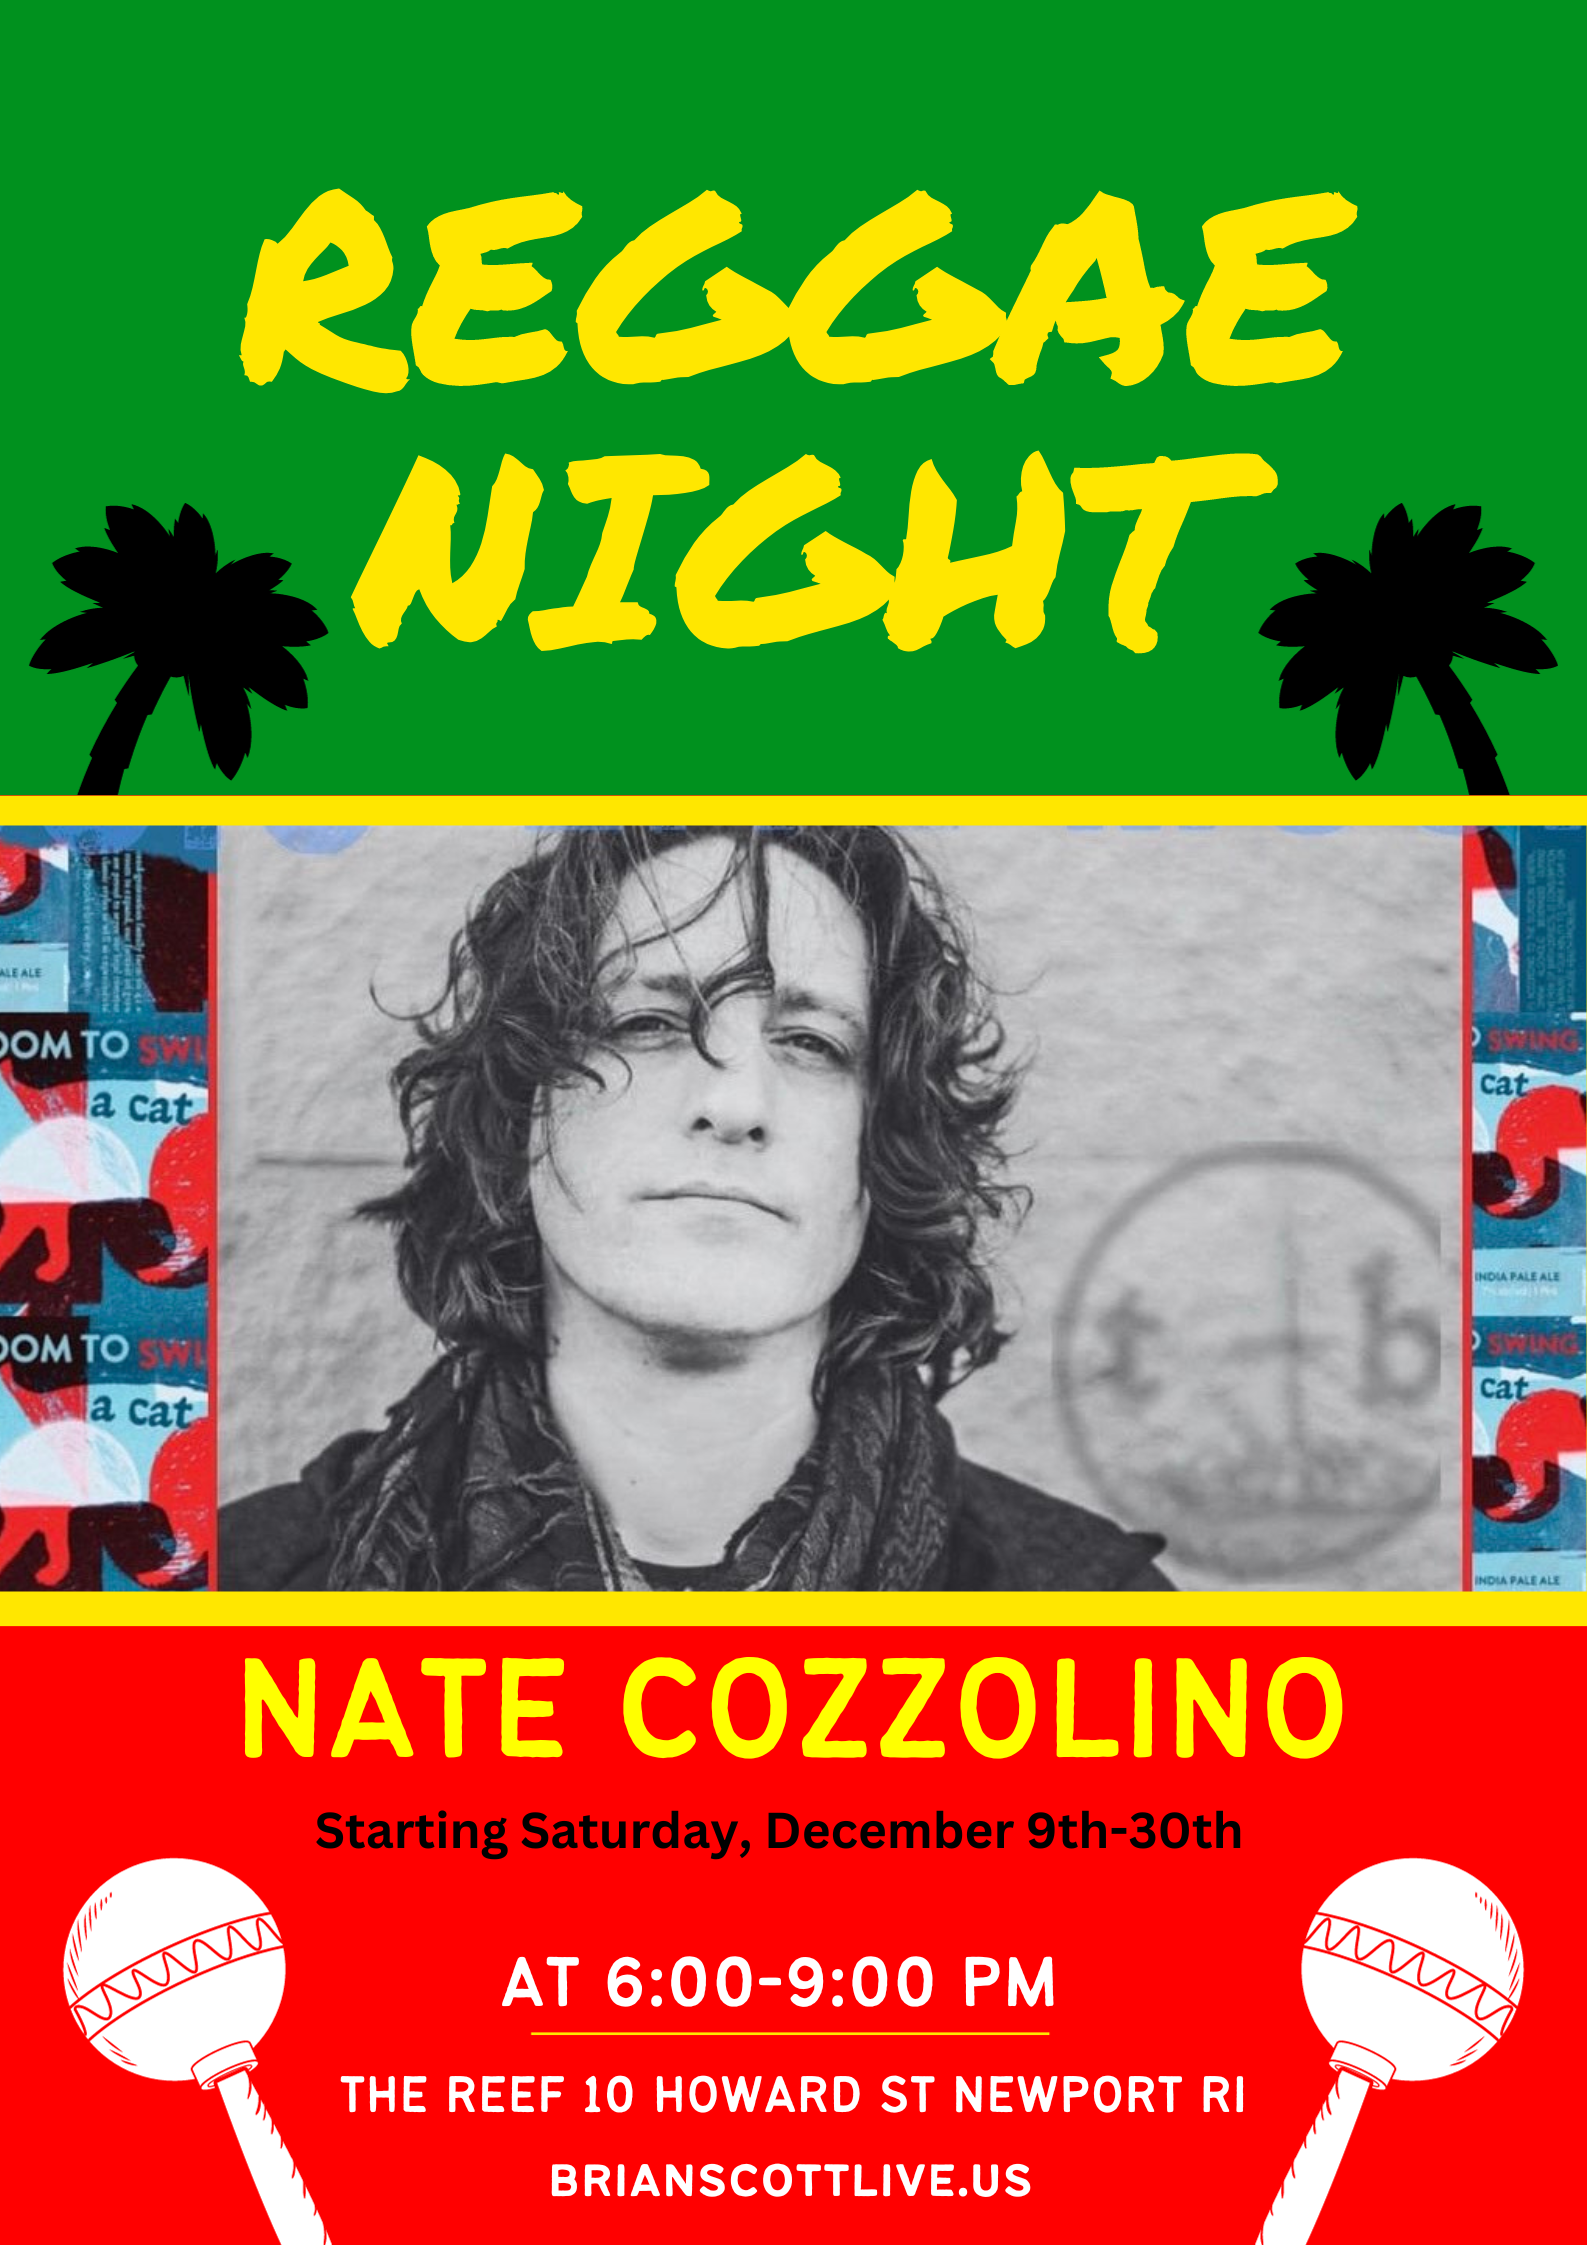 Reggae Night - Nate Cozzolino Looking for something to do this weekend? Look no further! Join us for Reggae Night featuring Nate Cozzolino. Make your reservation now!